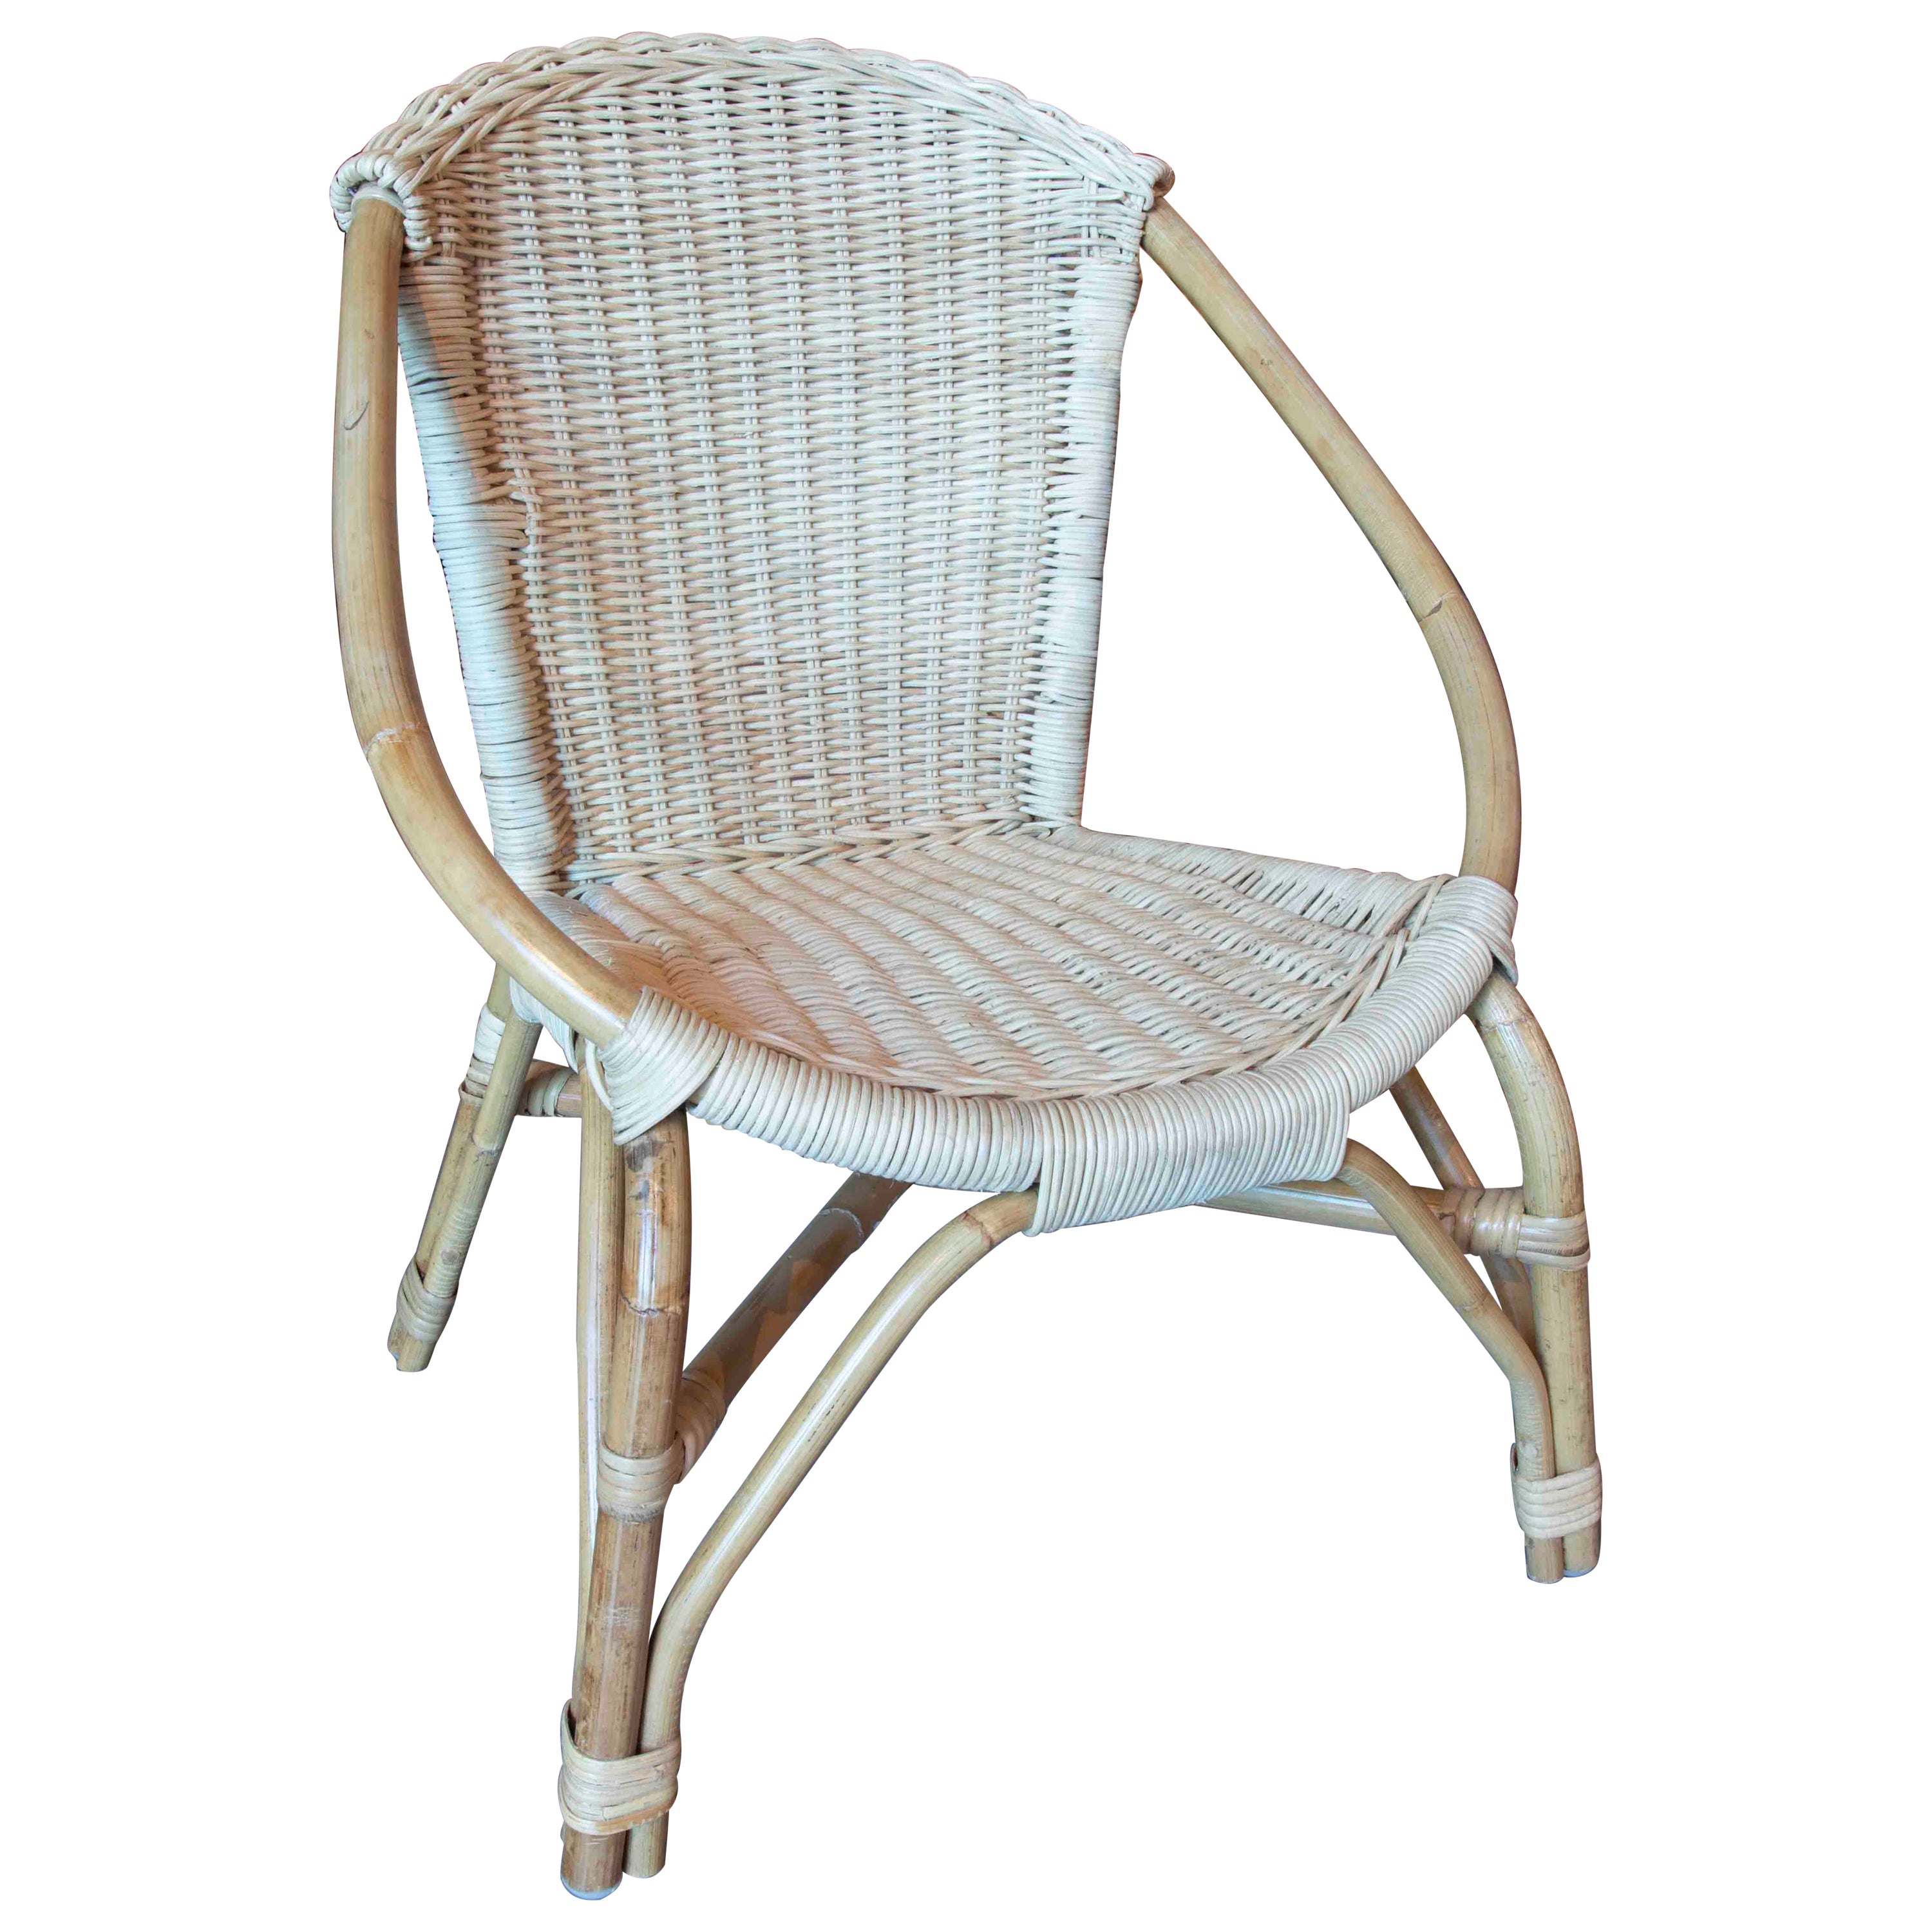 Handmade in its Natural Colour Wicker and Rattan Chair for Children 